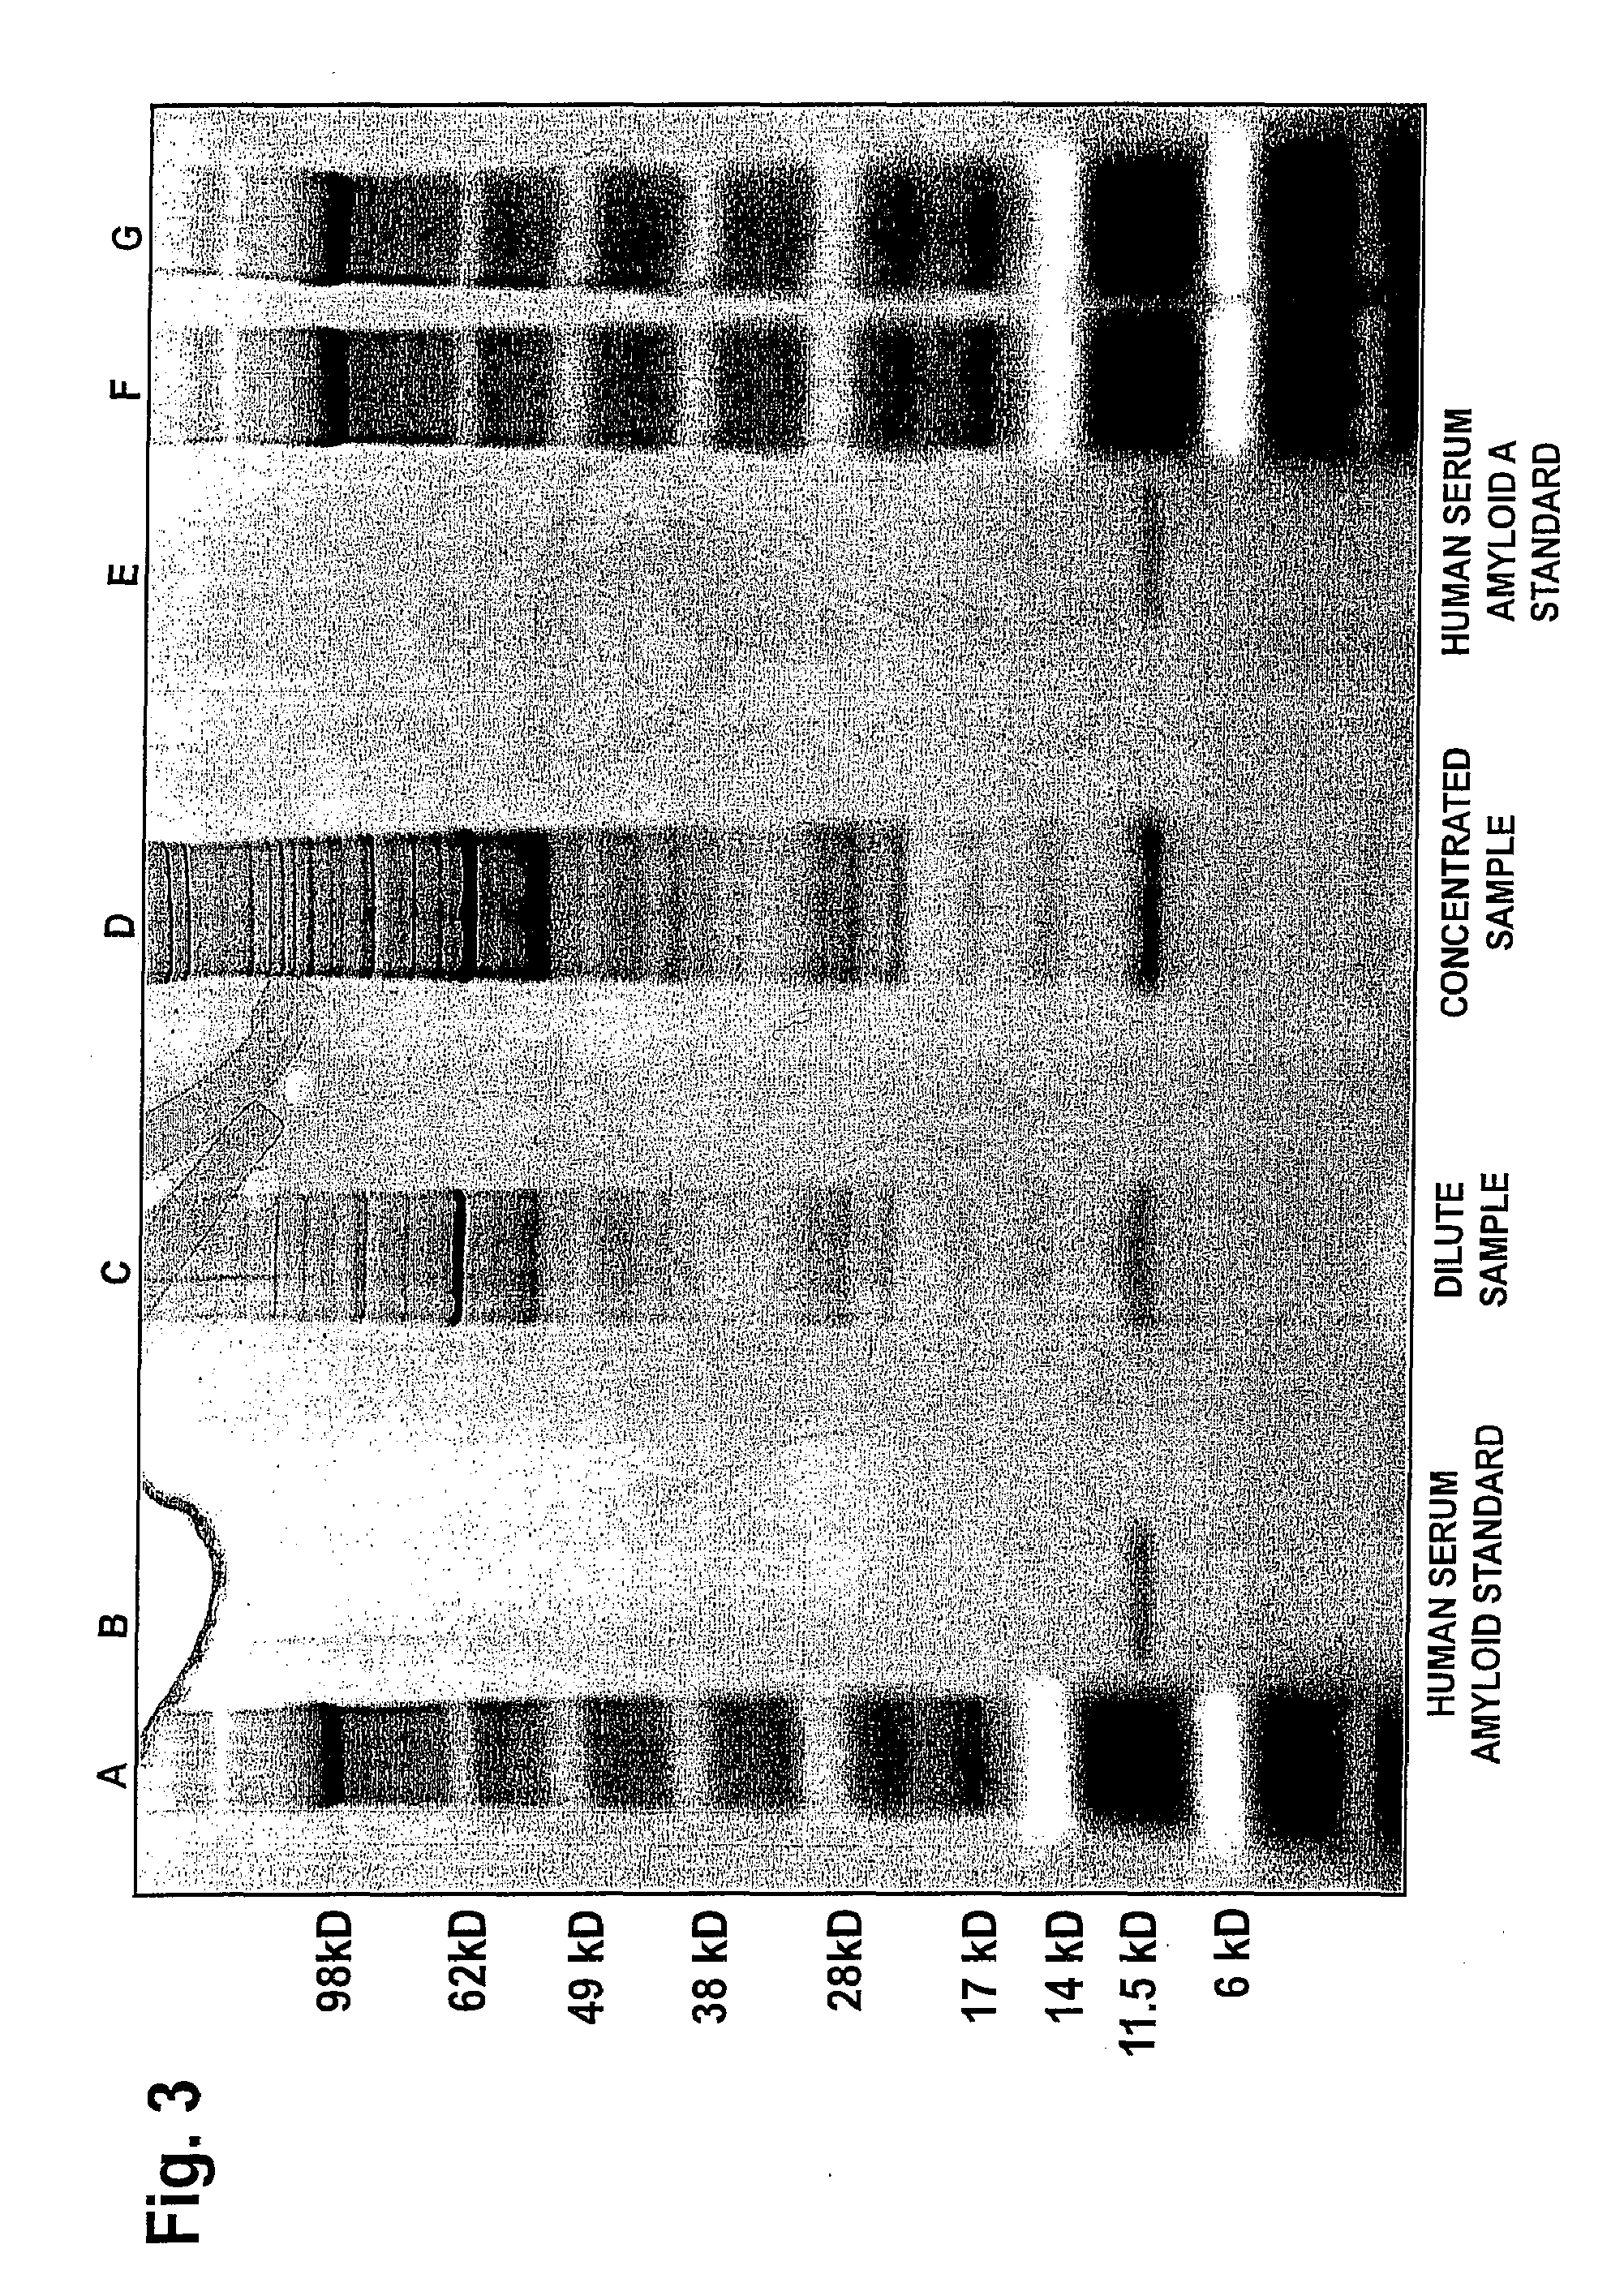 Methods And Marker Combinations For Screening For Predisposition To Lung Cancer